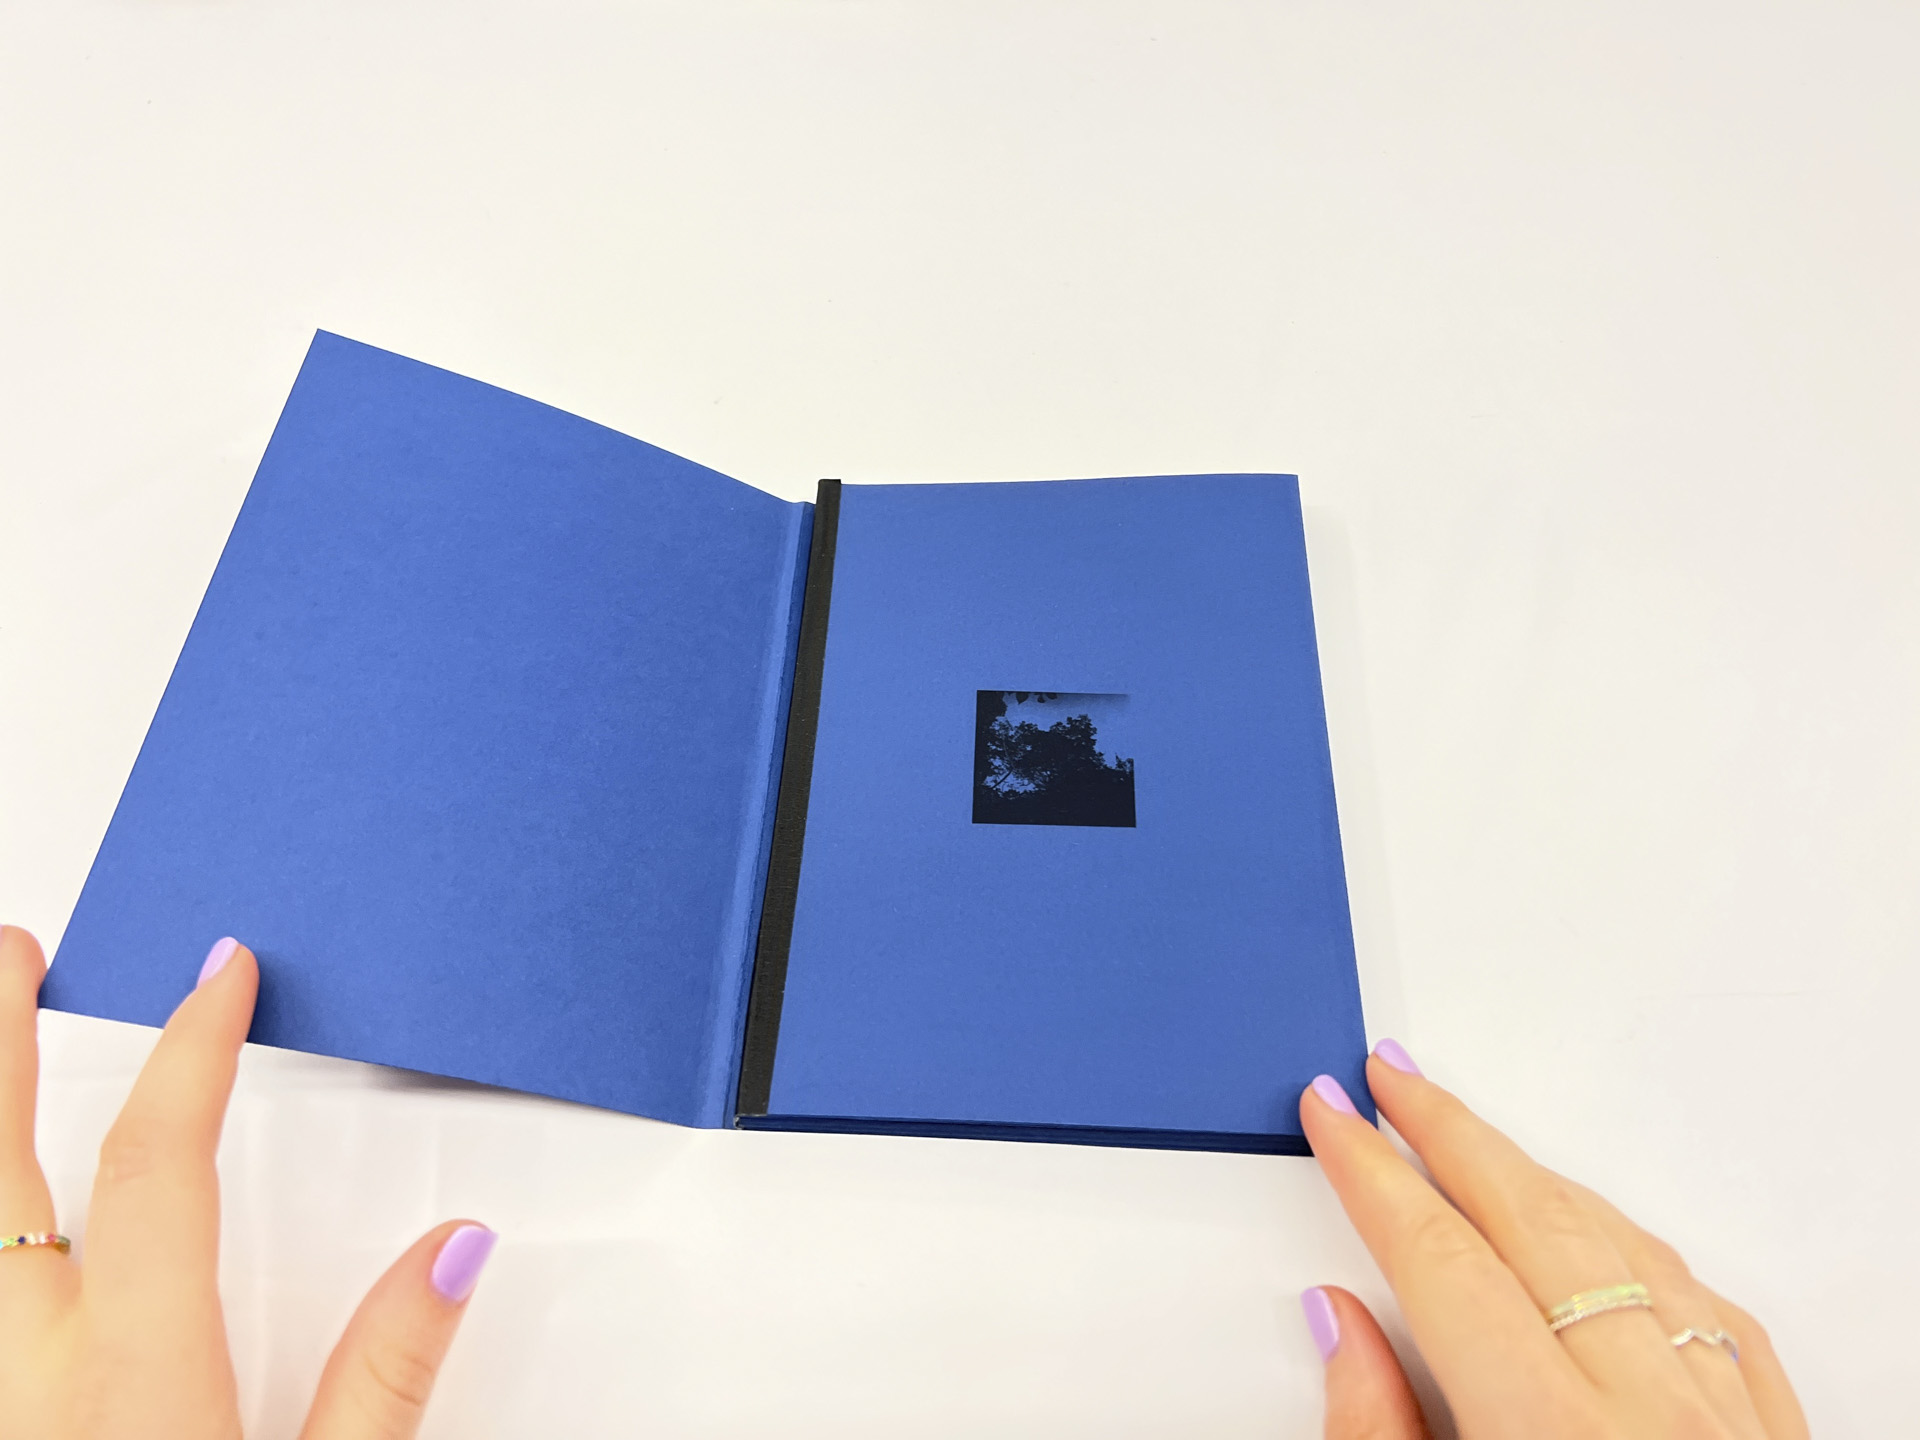 Photo of a handmade book - color is blue, with black line art on cover